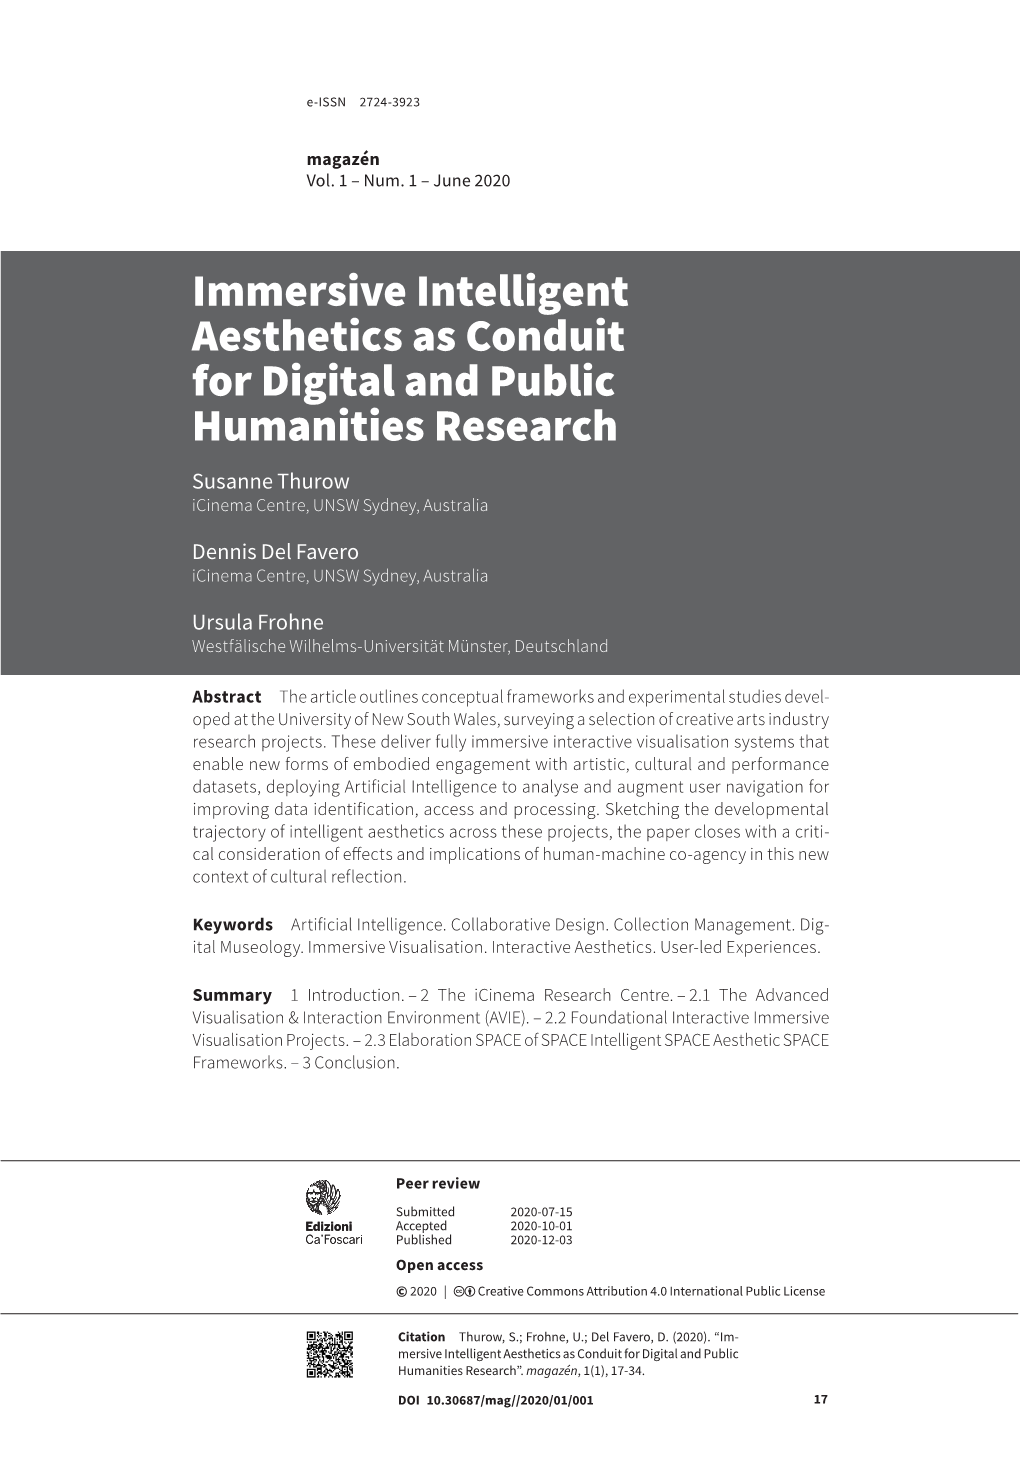 Immersive Intelligent Aesthetics As Conduit for Digital and Public Humanities Research Susanne Thurow Icinema Centre, UNSW Sydney, Australia